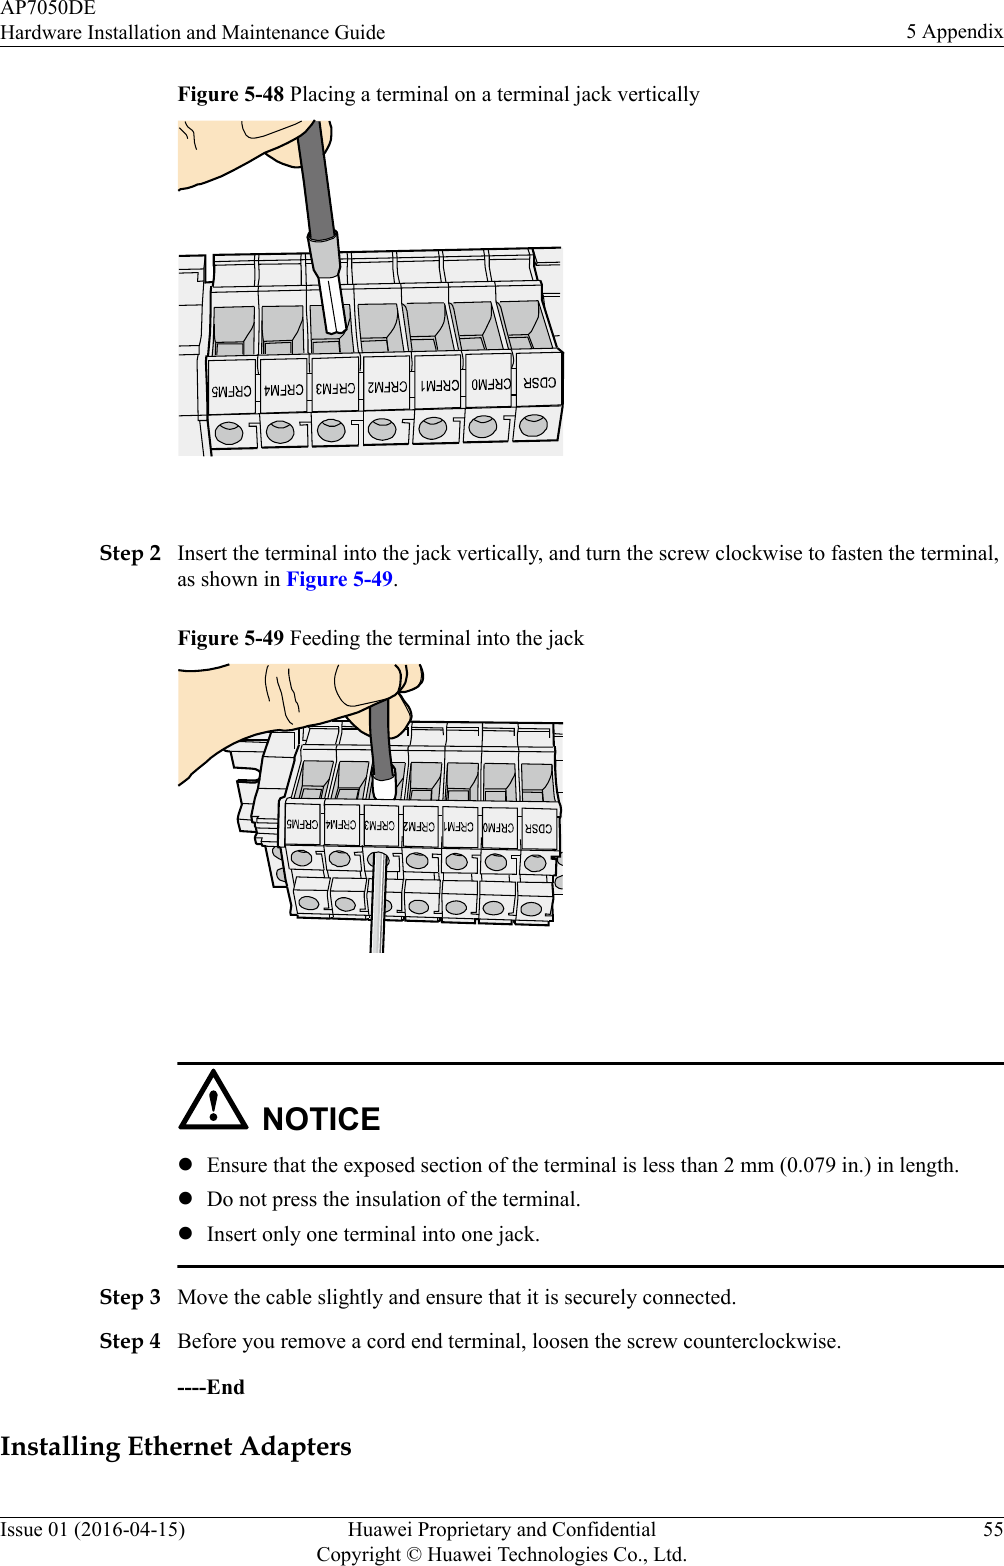 Figure 5-48 Placing a terminal on a terminal jack vertically Step 2 Insert the terminal into the jack vertically, and turn the screw clockwise to fasten the terminal,as shown in Figure 5-49.Figure 5-49 Feeding the terminal into the jack NOTICElEnsure that the exposed section of the terminal is less than 2 mm (0.079 in.) in length.lDo not press the insulation of the terminal.lInsert only one terminal into one jack.Step 3 Move the cable slightly and ensure that it is securely connected.Step 4 Before you remove a cord end terminal, loosen the screw counterclockwise.----EndInstalling Ethernet AdaptersAP7050DEHardware Installation and Maintenance Guide 5 AppendixIssue 01 (2016-04-15) Huawei Proprietary and ConfidentialCopyright © Huawei Technologies Co., Ltd.55